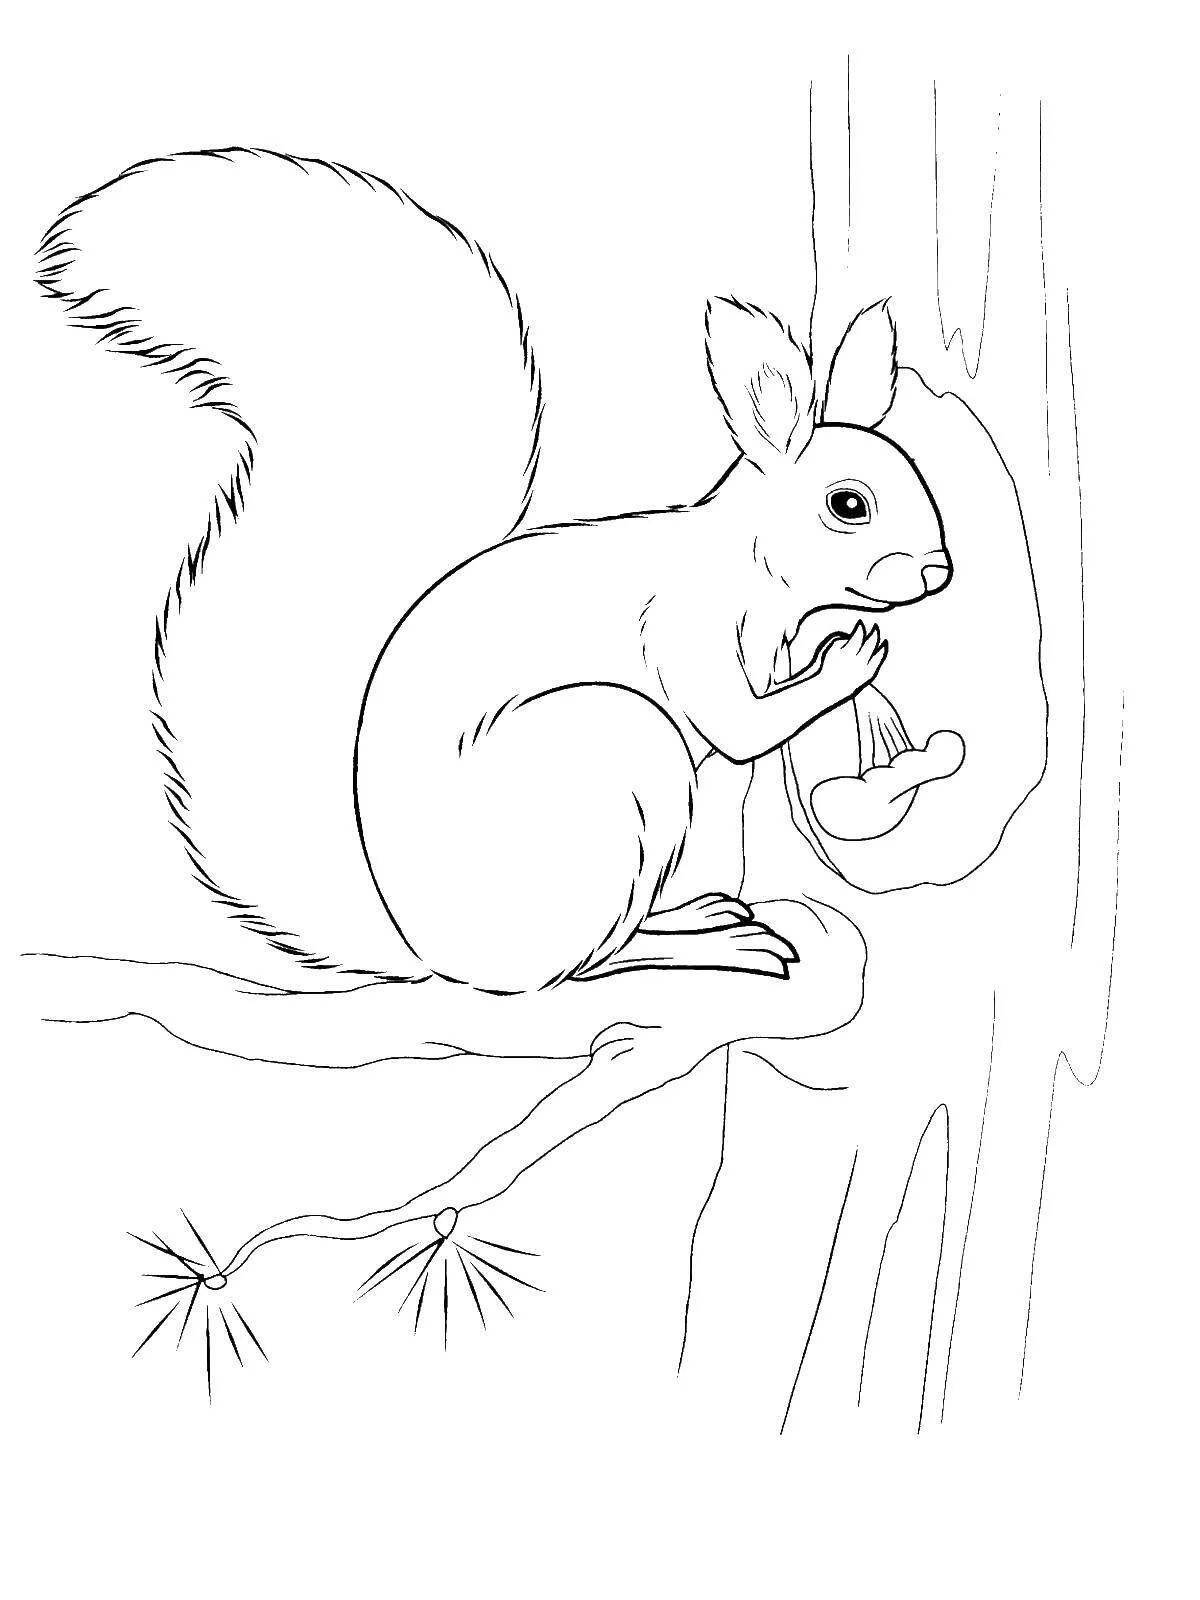 Coloring page playful winter squirrel